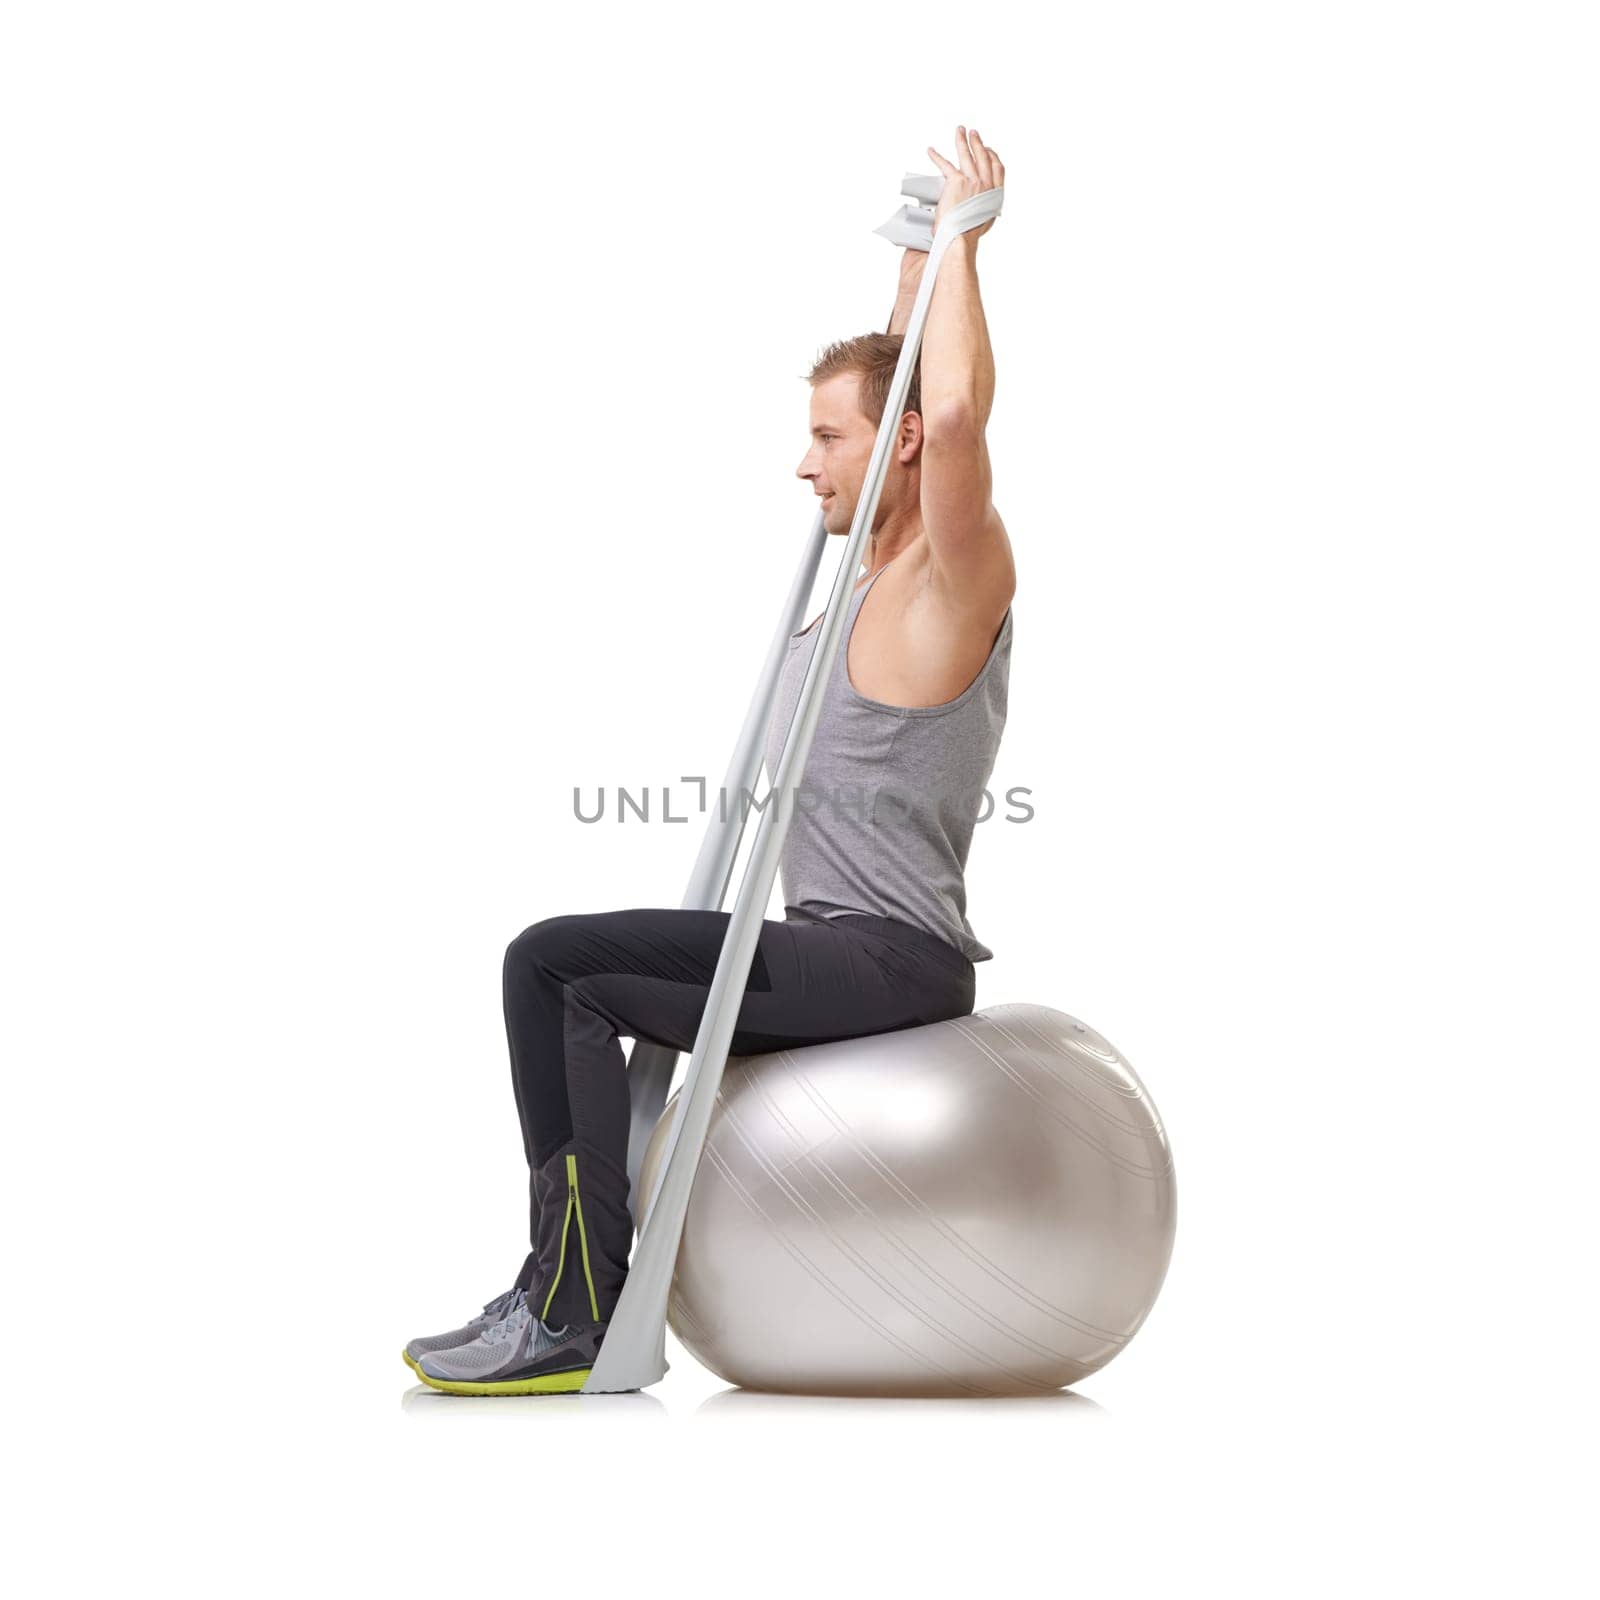 Yoga ball, resistance band and man doing exercise in studio for health, wellness and bodycare. Sport, fitness and young male person from Australia with arms workout or training by white background